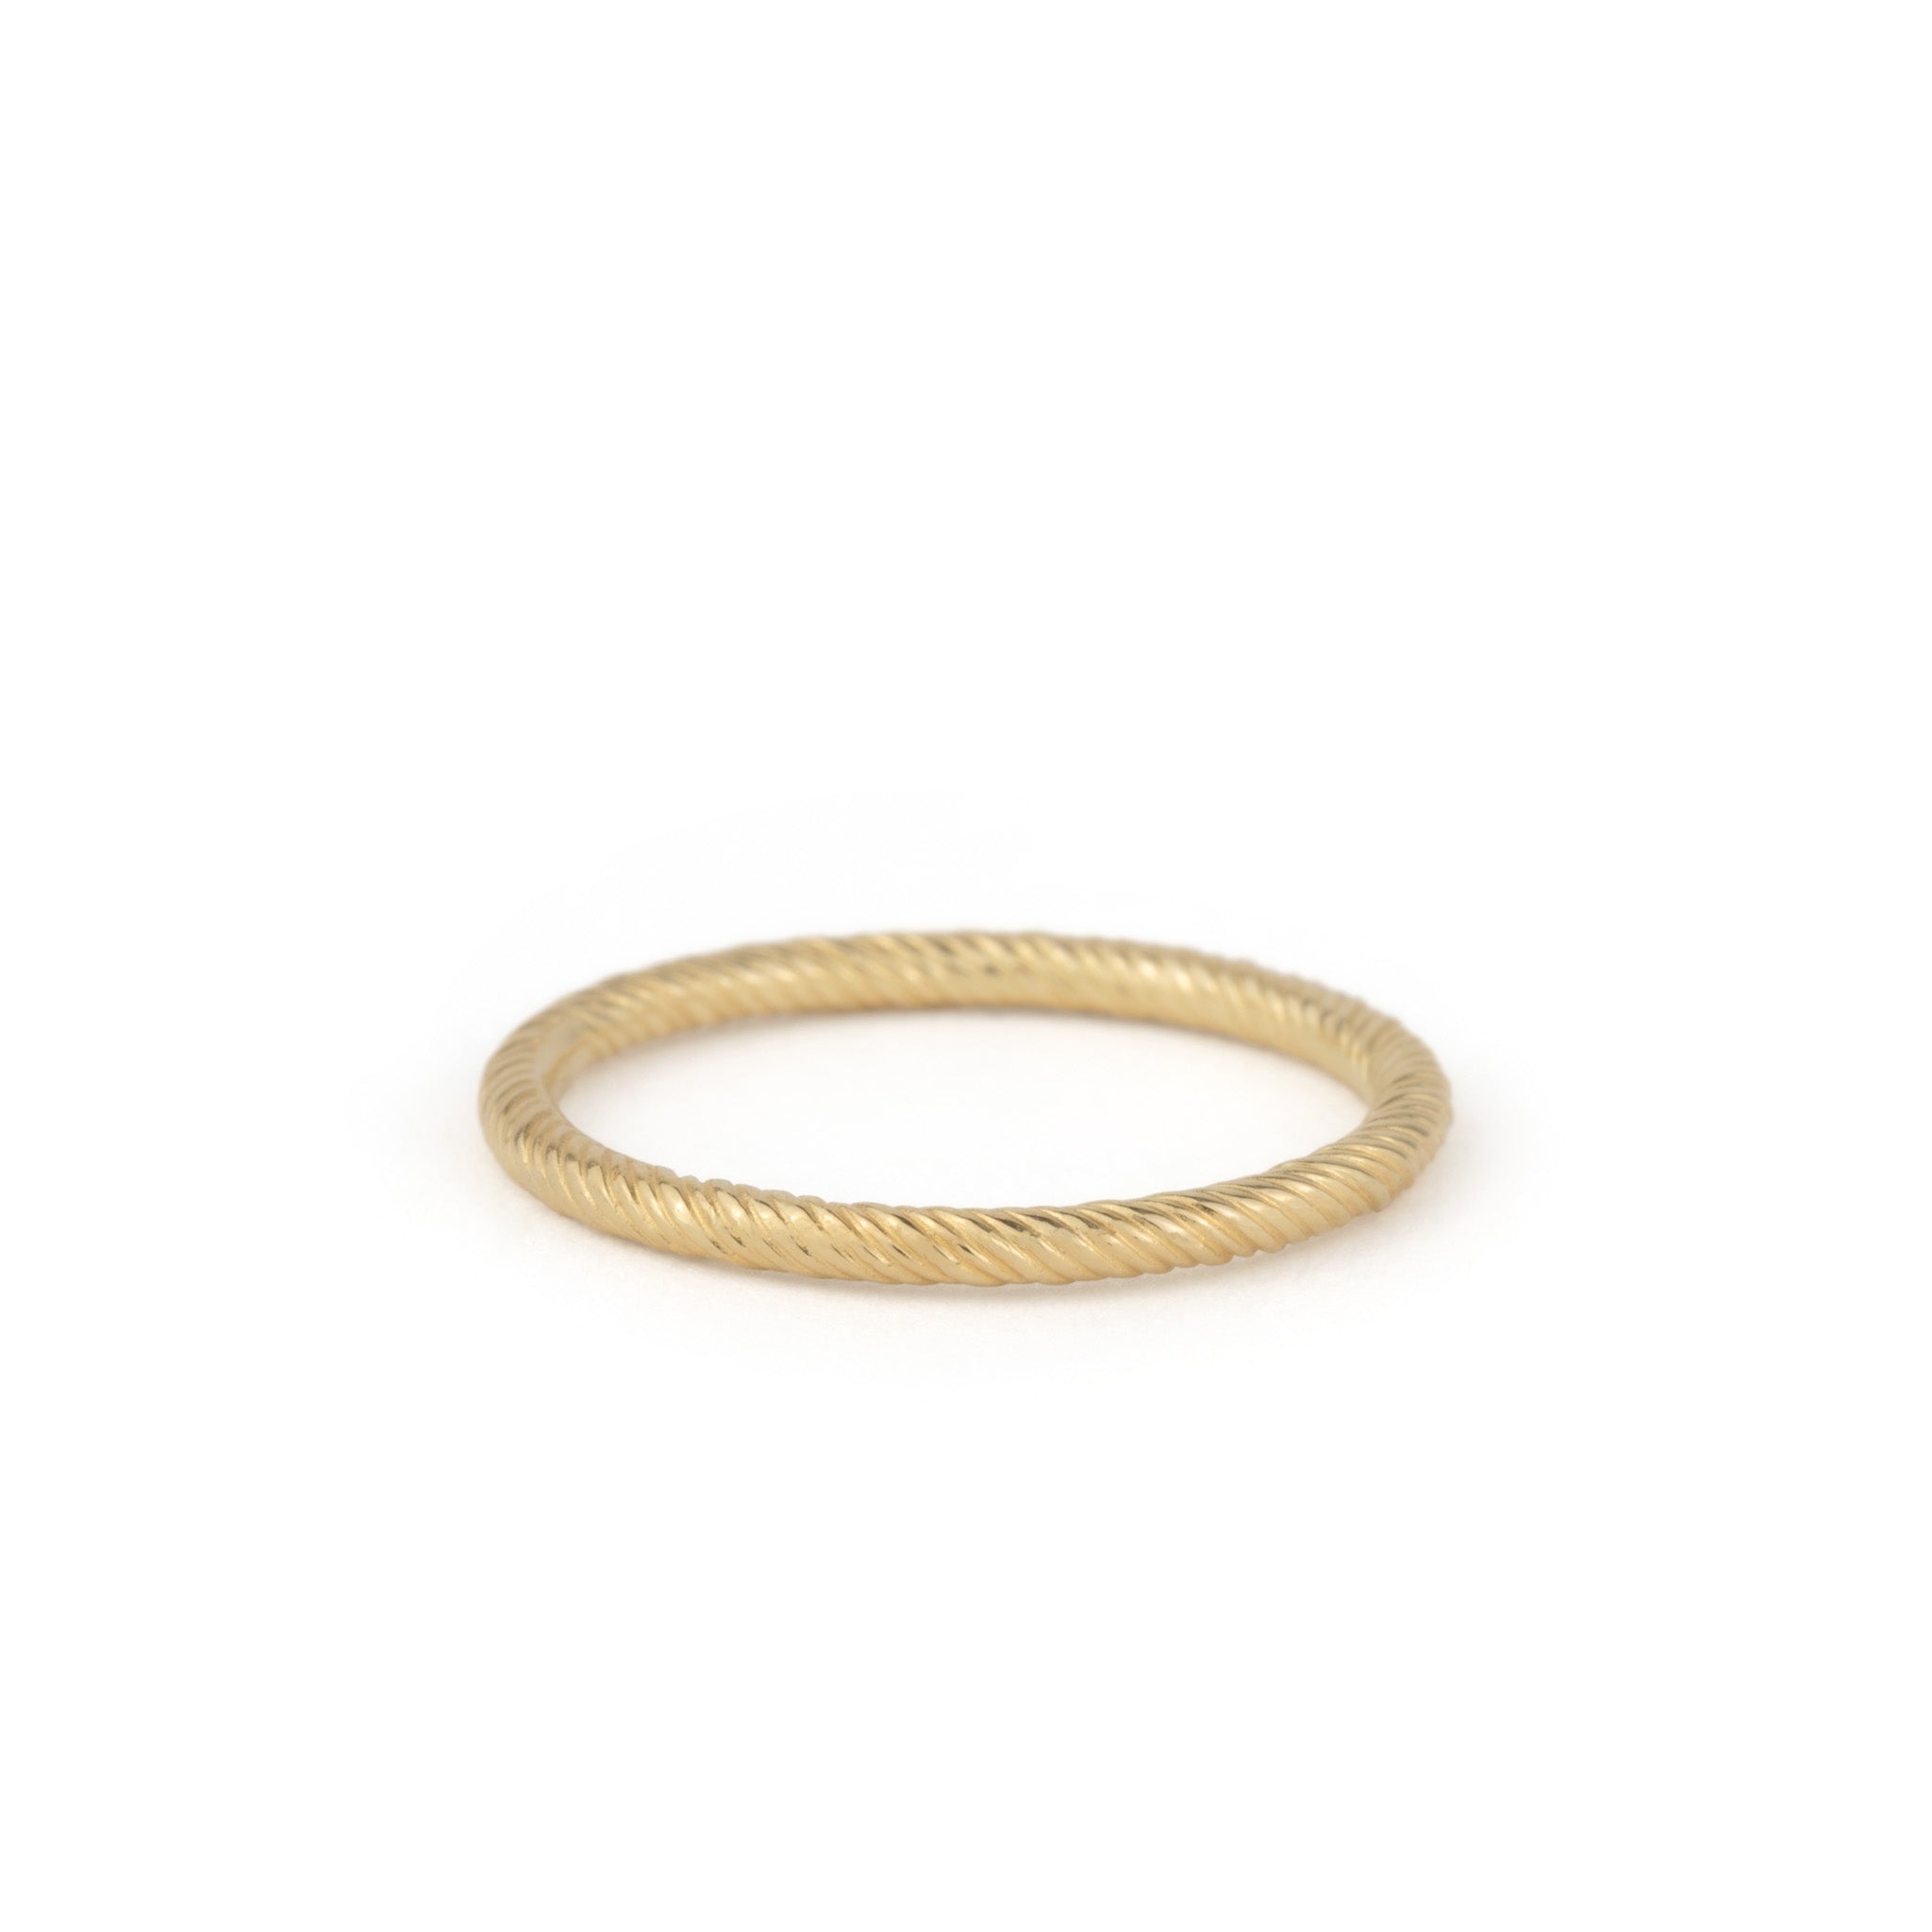 An Aiden Jae Banyan Thin Band Ring on a white background.